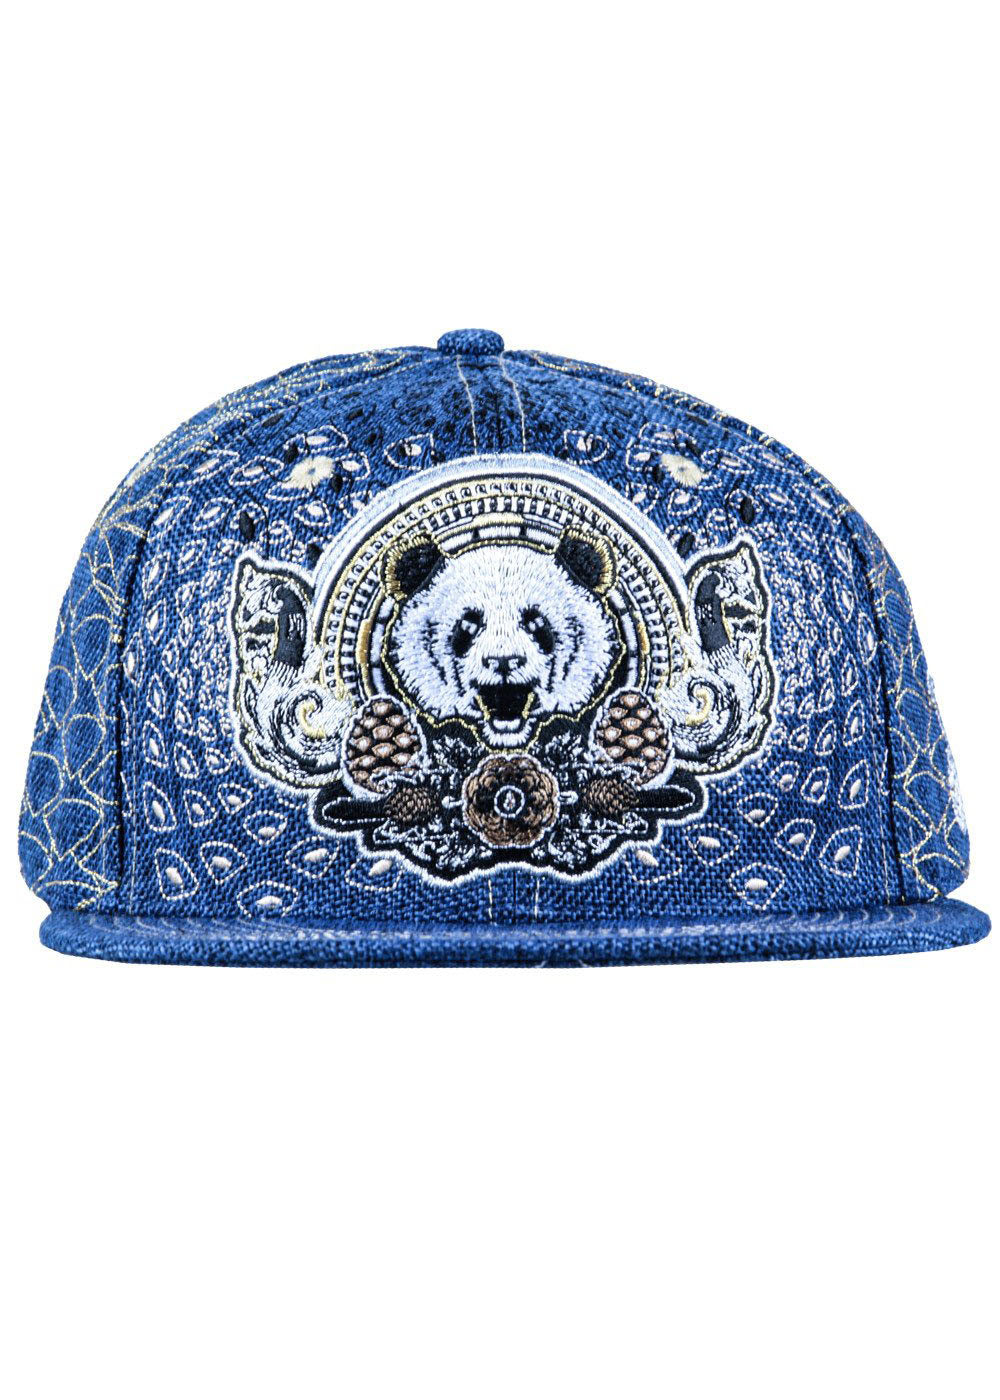 Grassroots Third Eye Pinecone Panda Fitted Hat